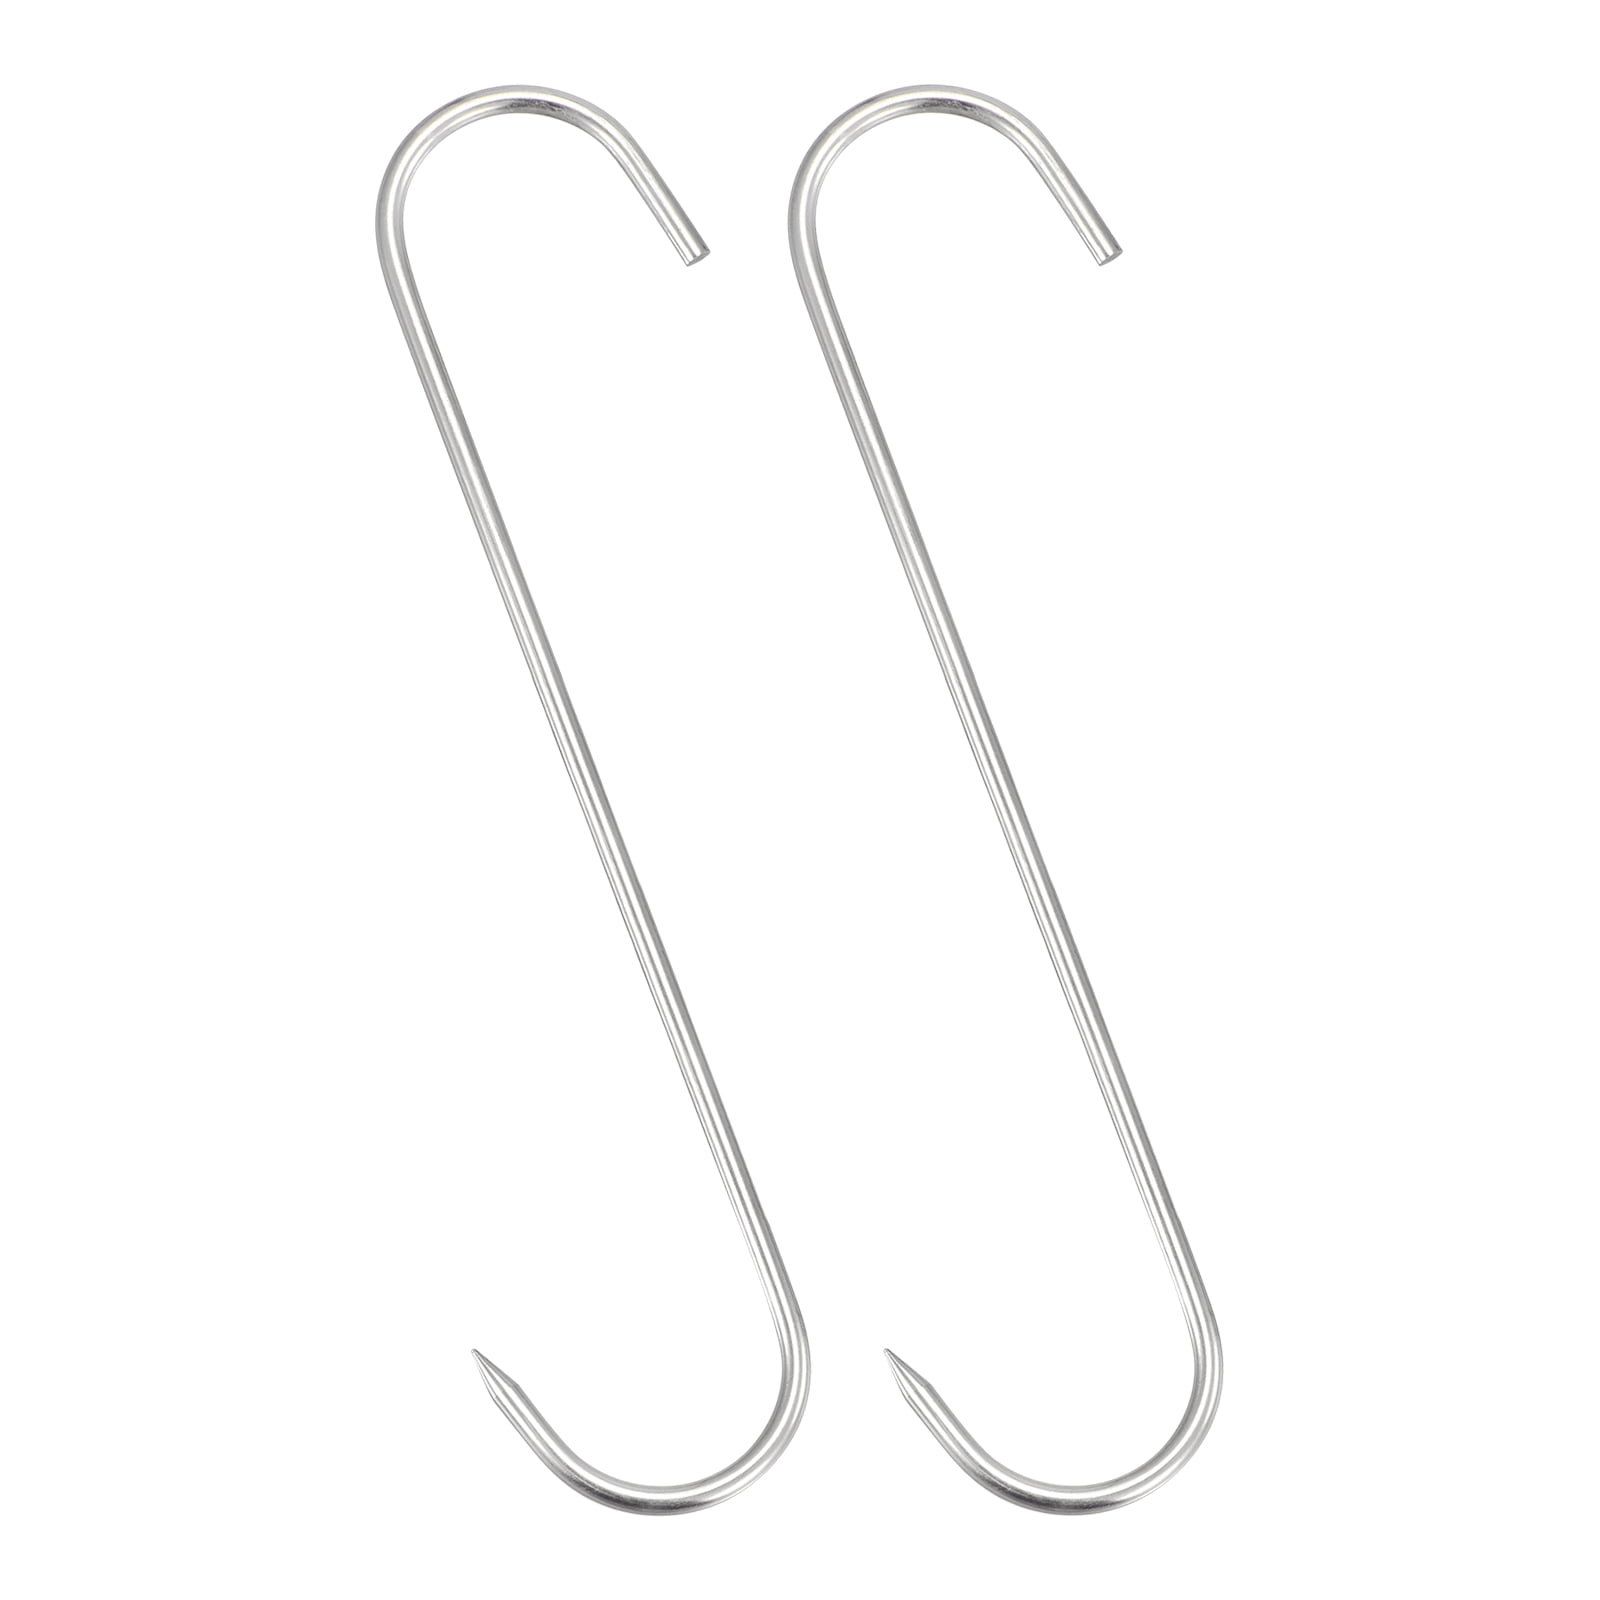 Uxcell 8.86 Meat Hooks, 0.2 Thick Stainless Steel S-Hook, Meat